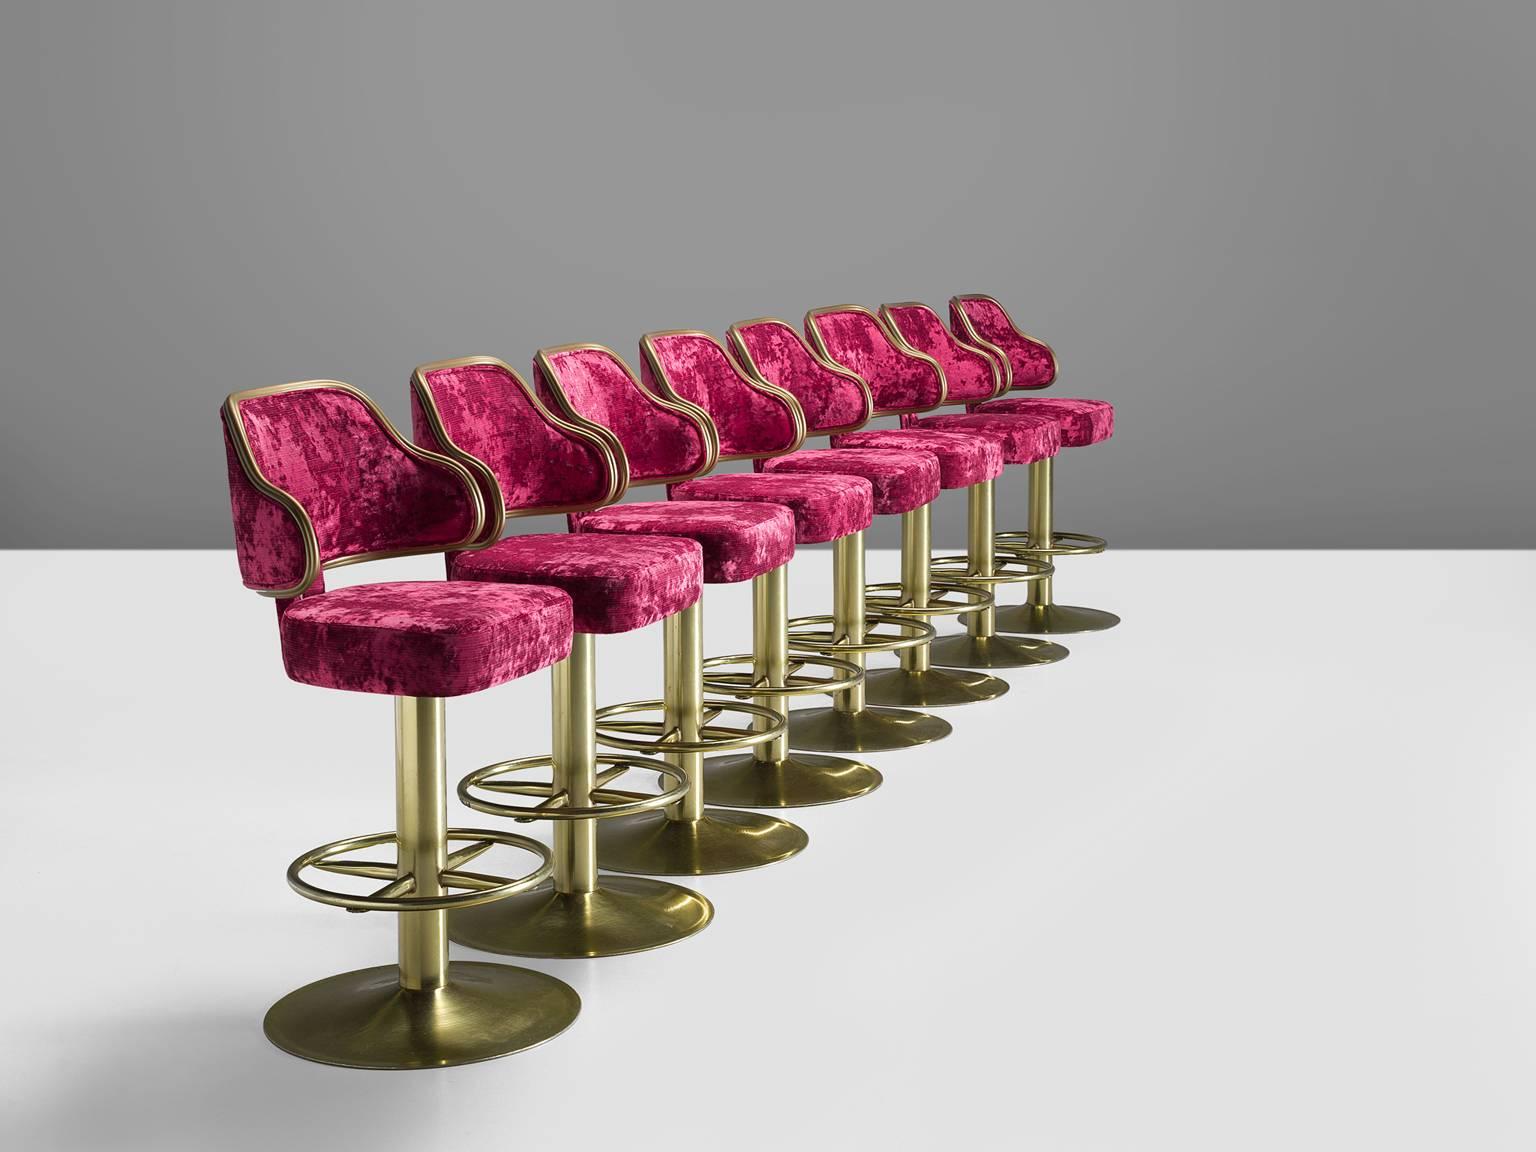 Bar stools, metal, pink velvet, Europe, design 1980s, newly upholstered 2017.

This extraordinary set of classic Casino barstools is upholstered with a deep pink colored velvet on a gold colored metal base. The stools serve as a playful reference